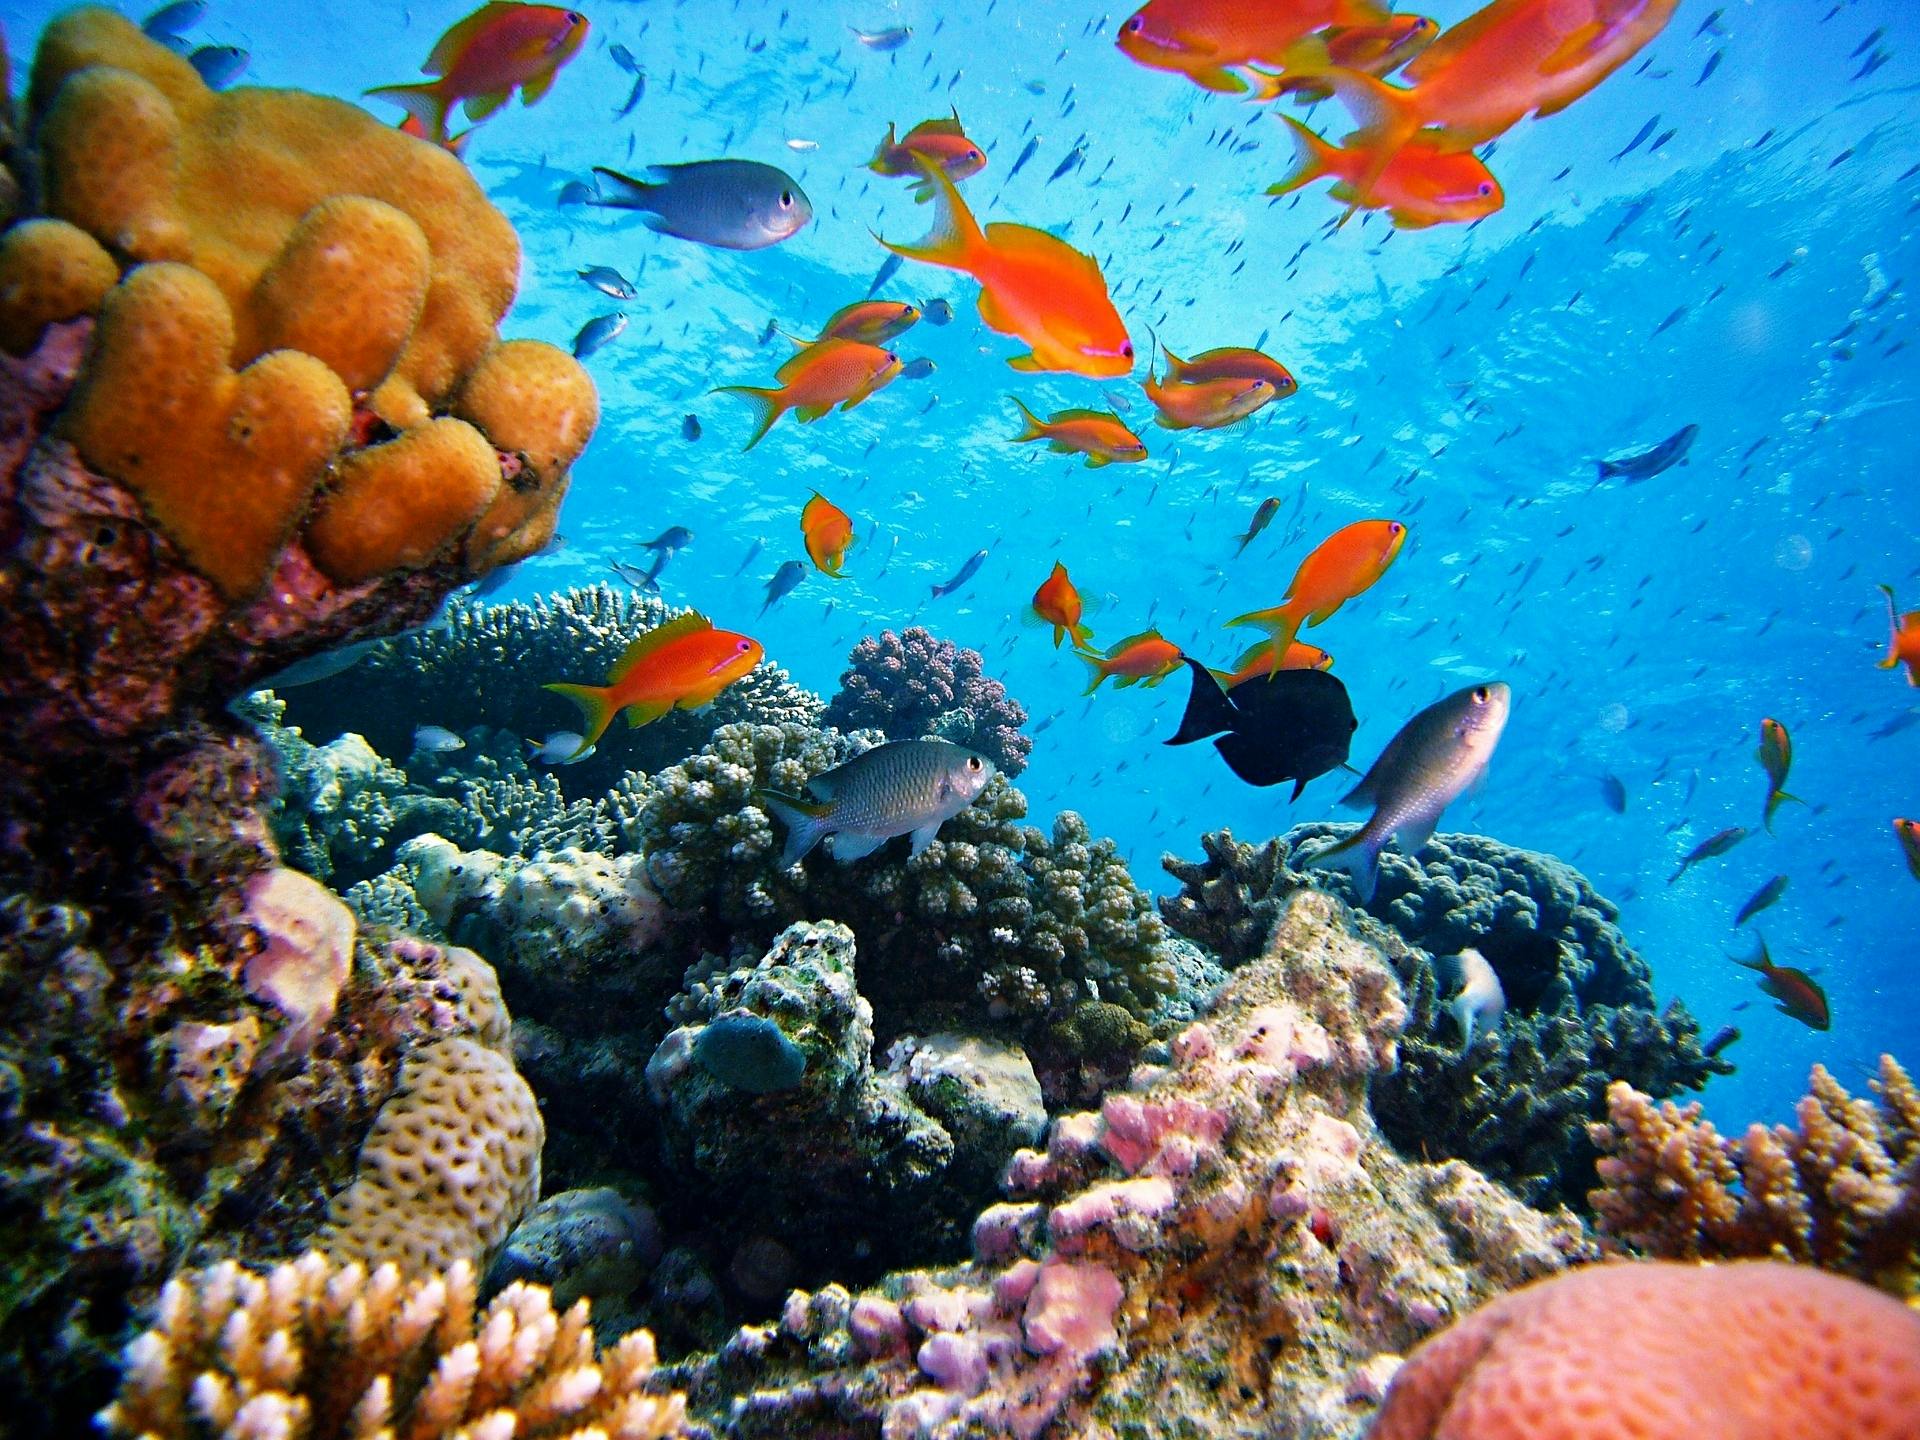 Satayah Reef Snorkeling Tour from Marsa Alam with Lunch and Drinks